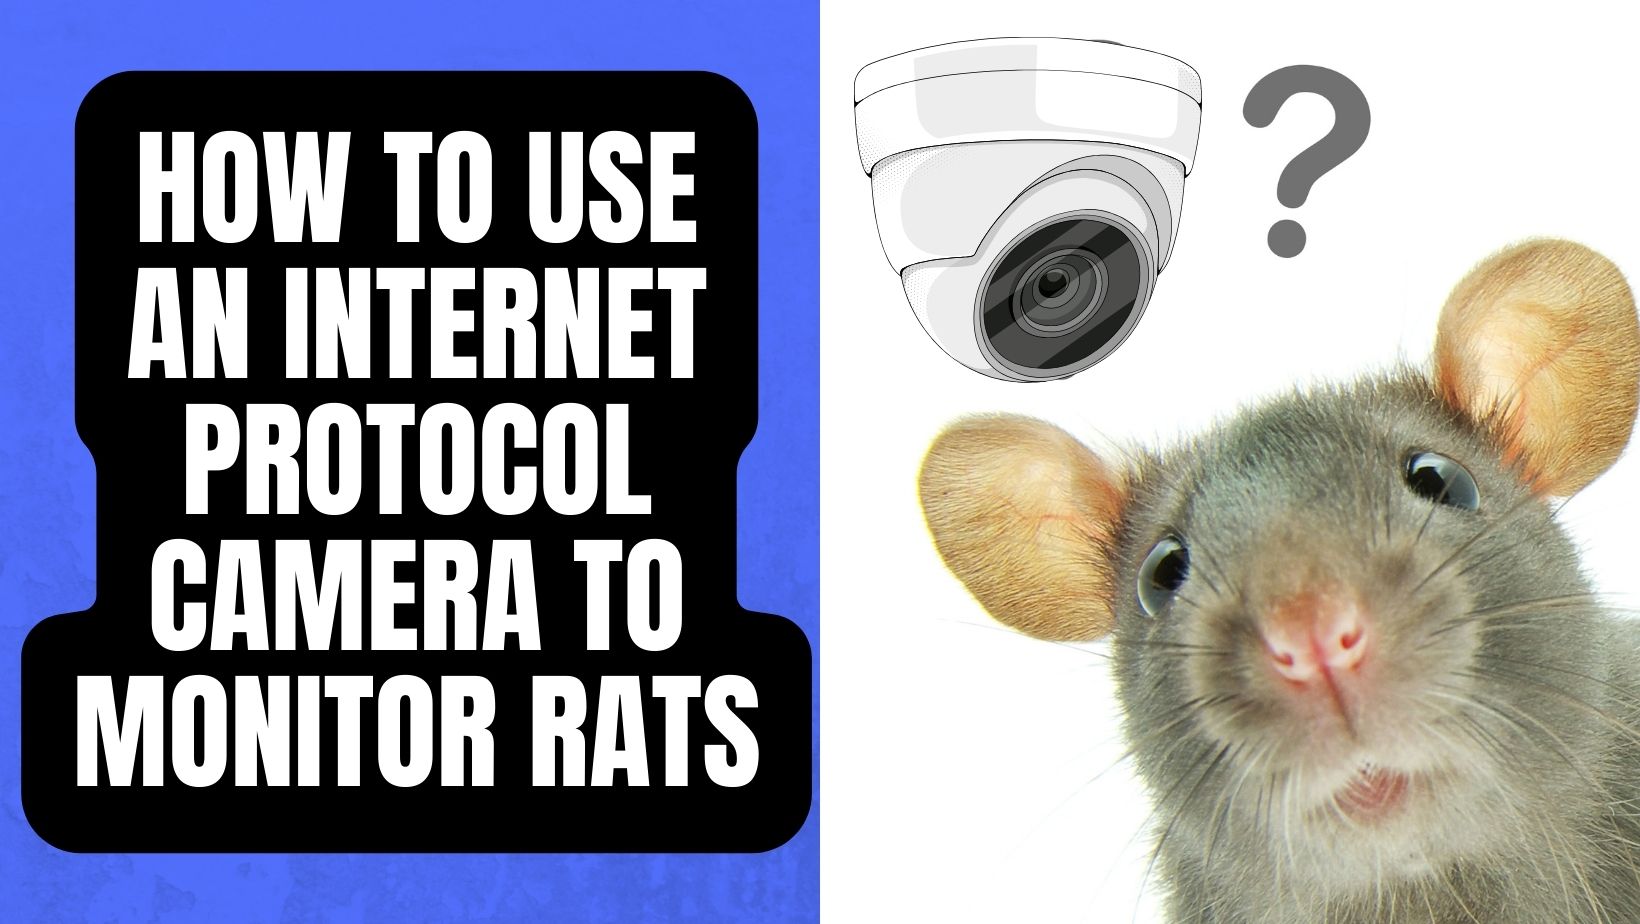 How to Use an Internet protocol Camera to Monitor Rats